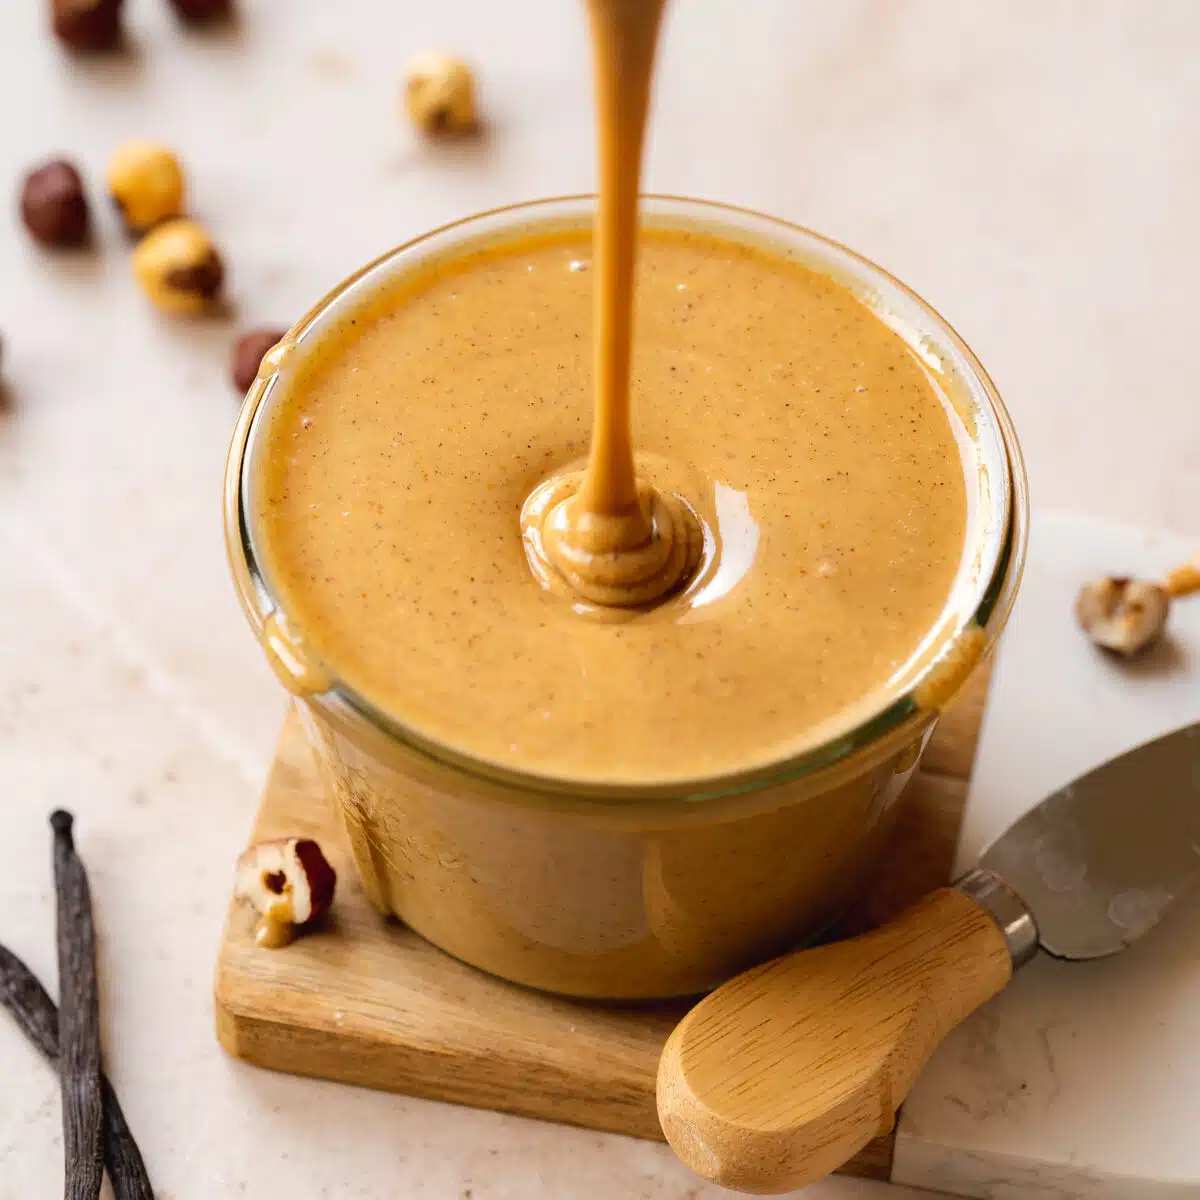 hazelnut butter dripping into a jar with roasted hazelnuts scattered around it.